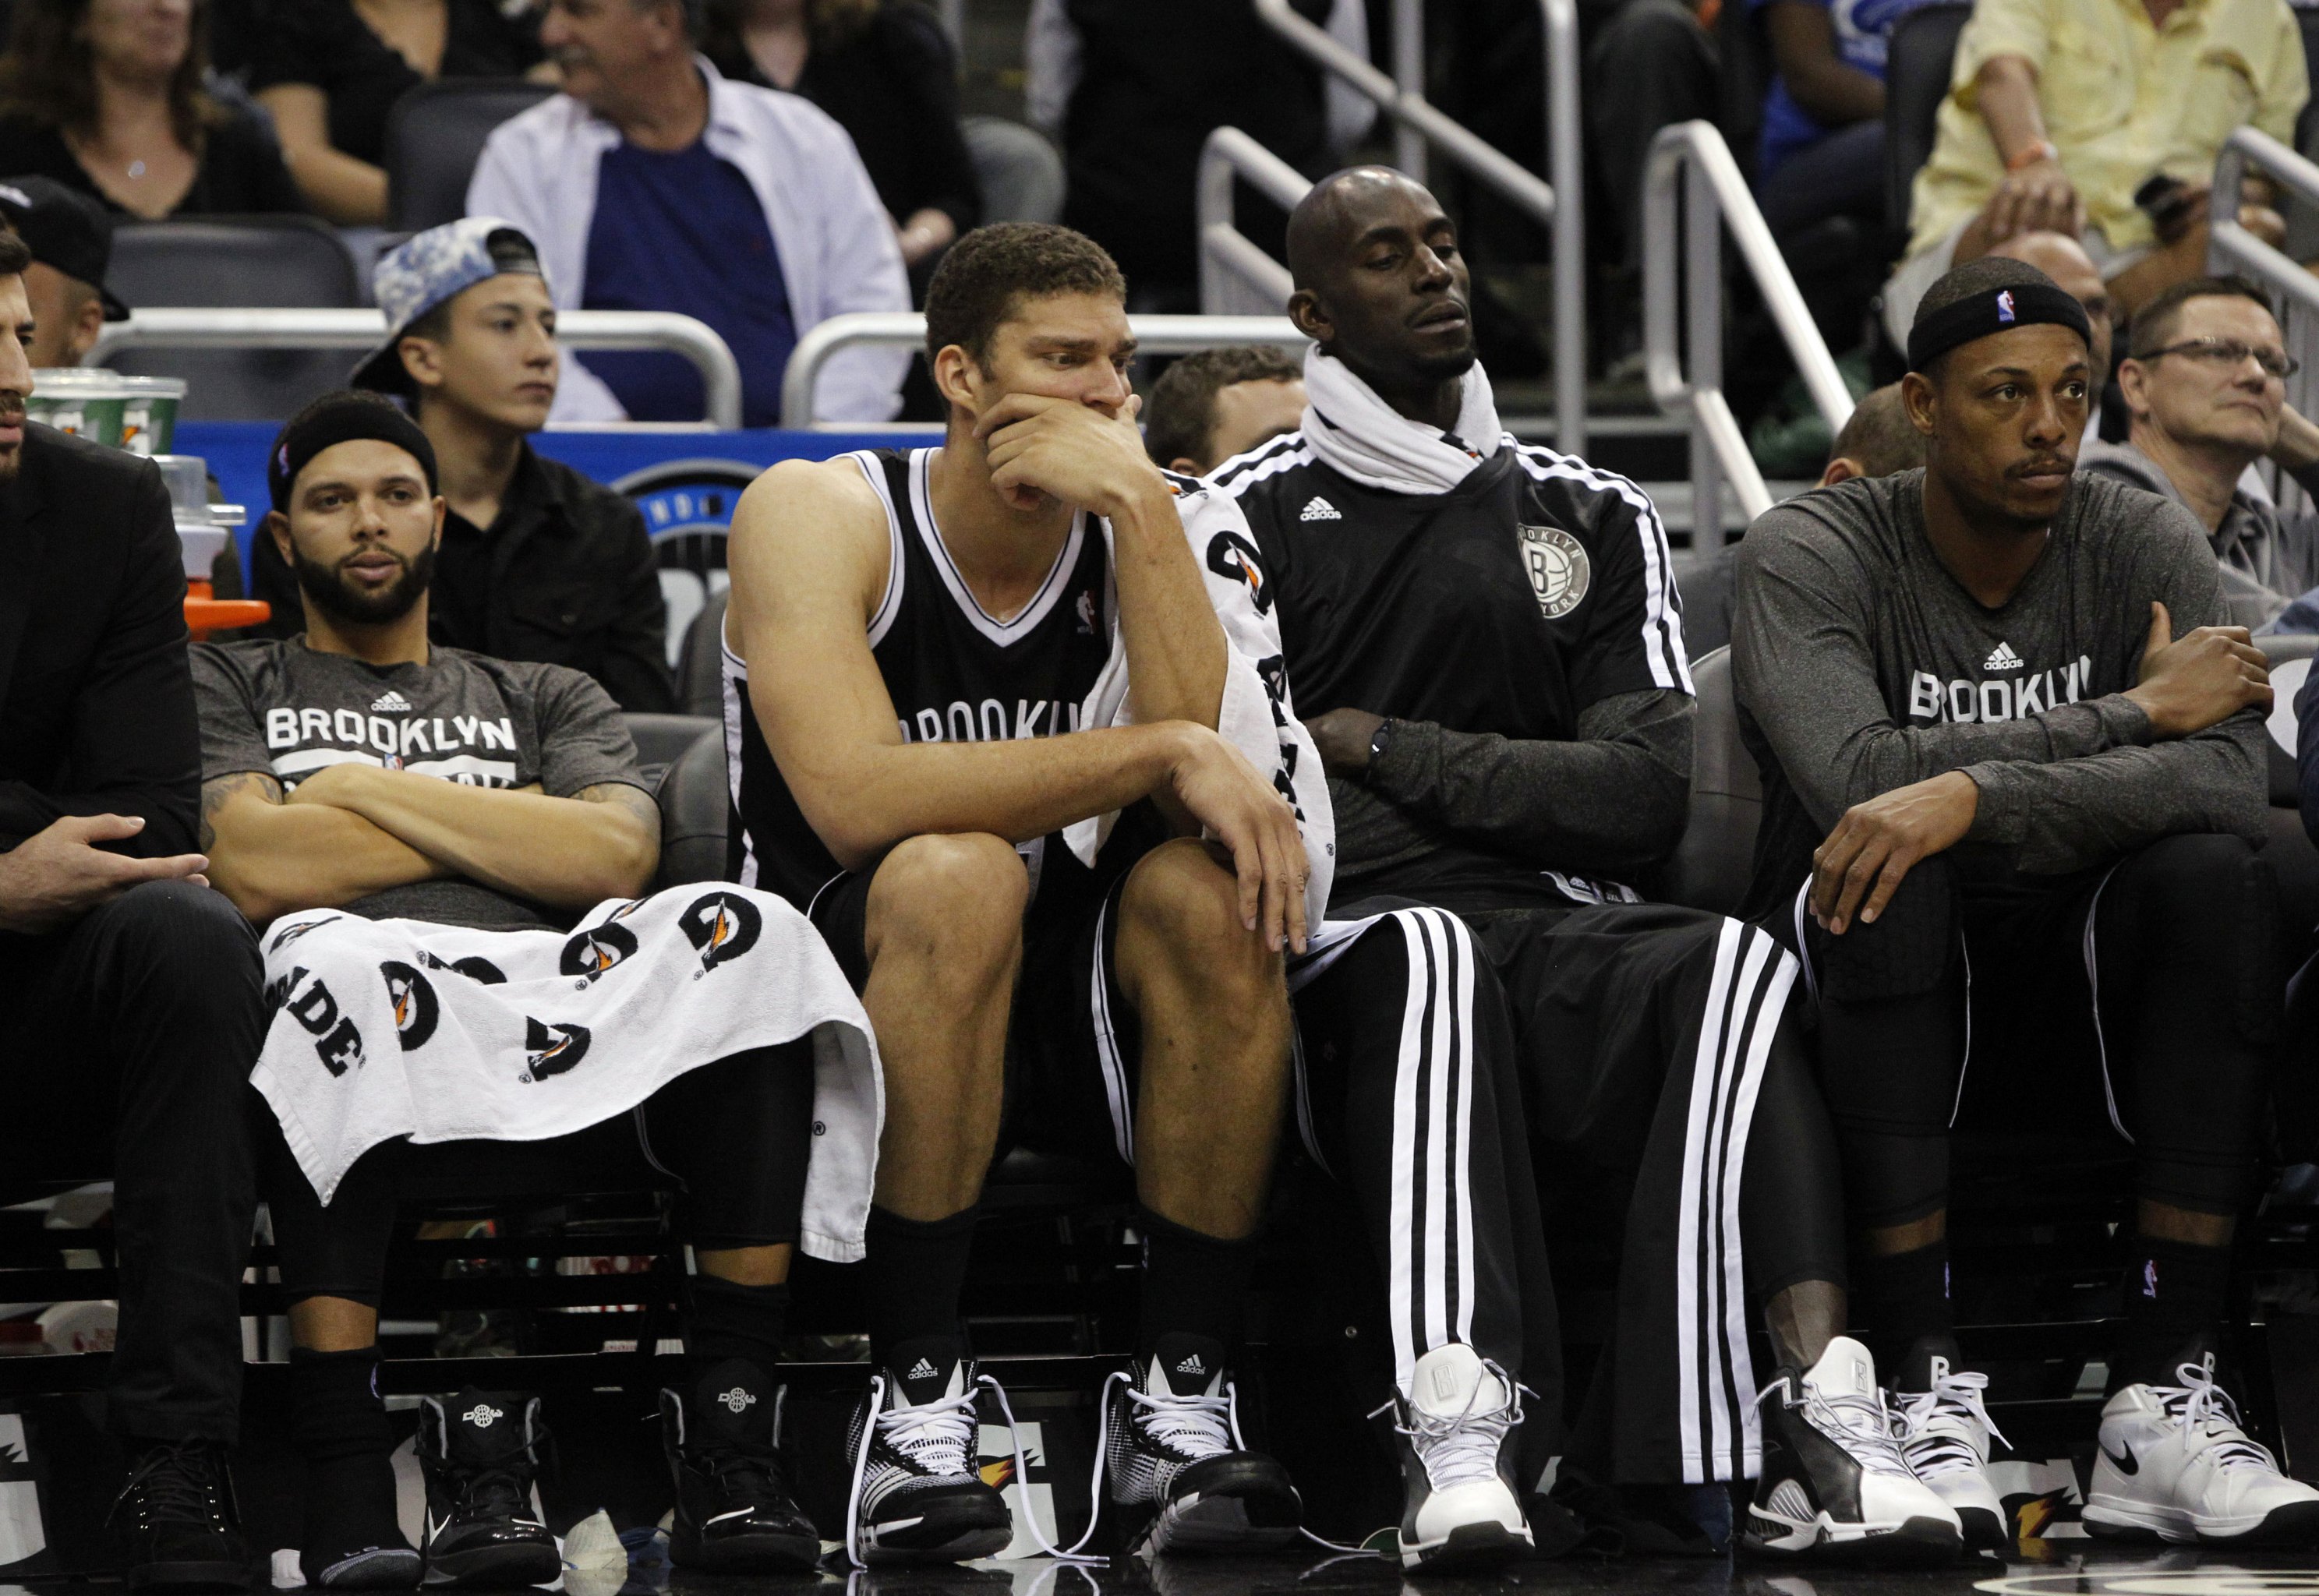 Andrea Bargnani's injury complicates Nets' roster decisions - Newsday